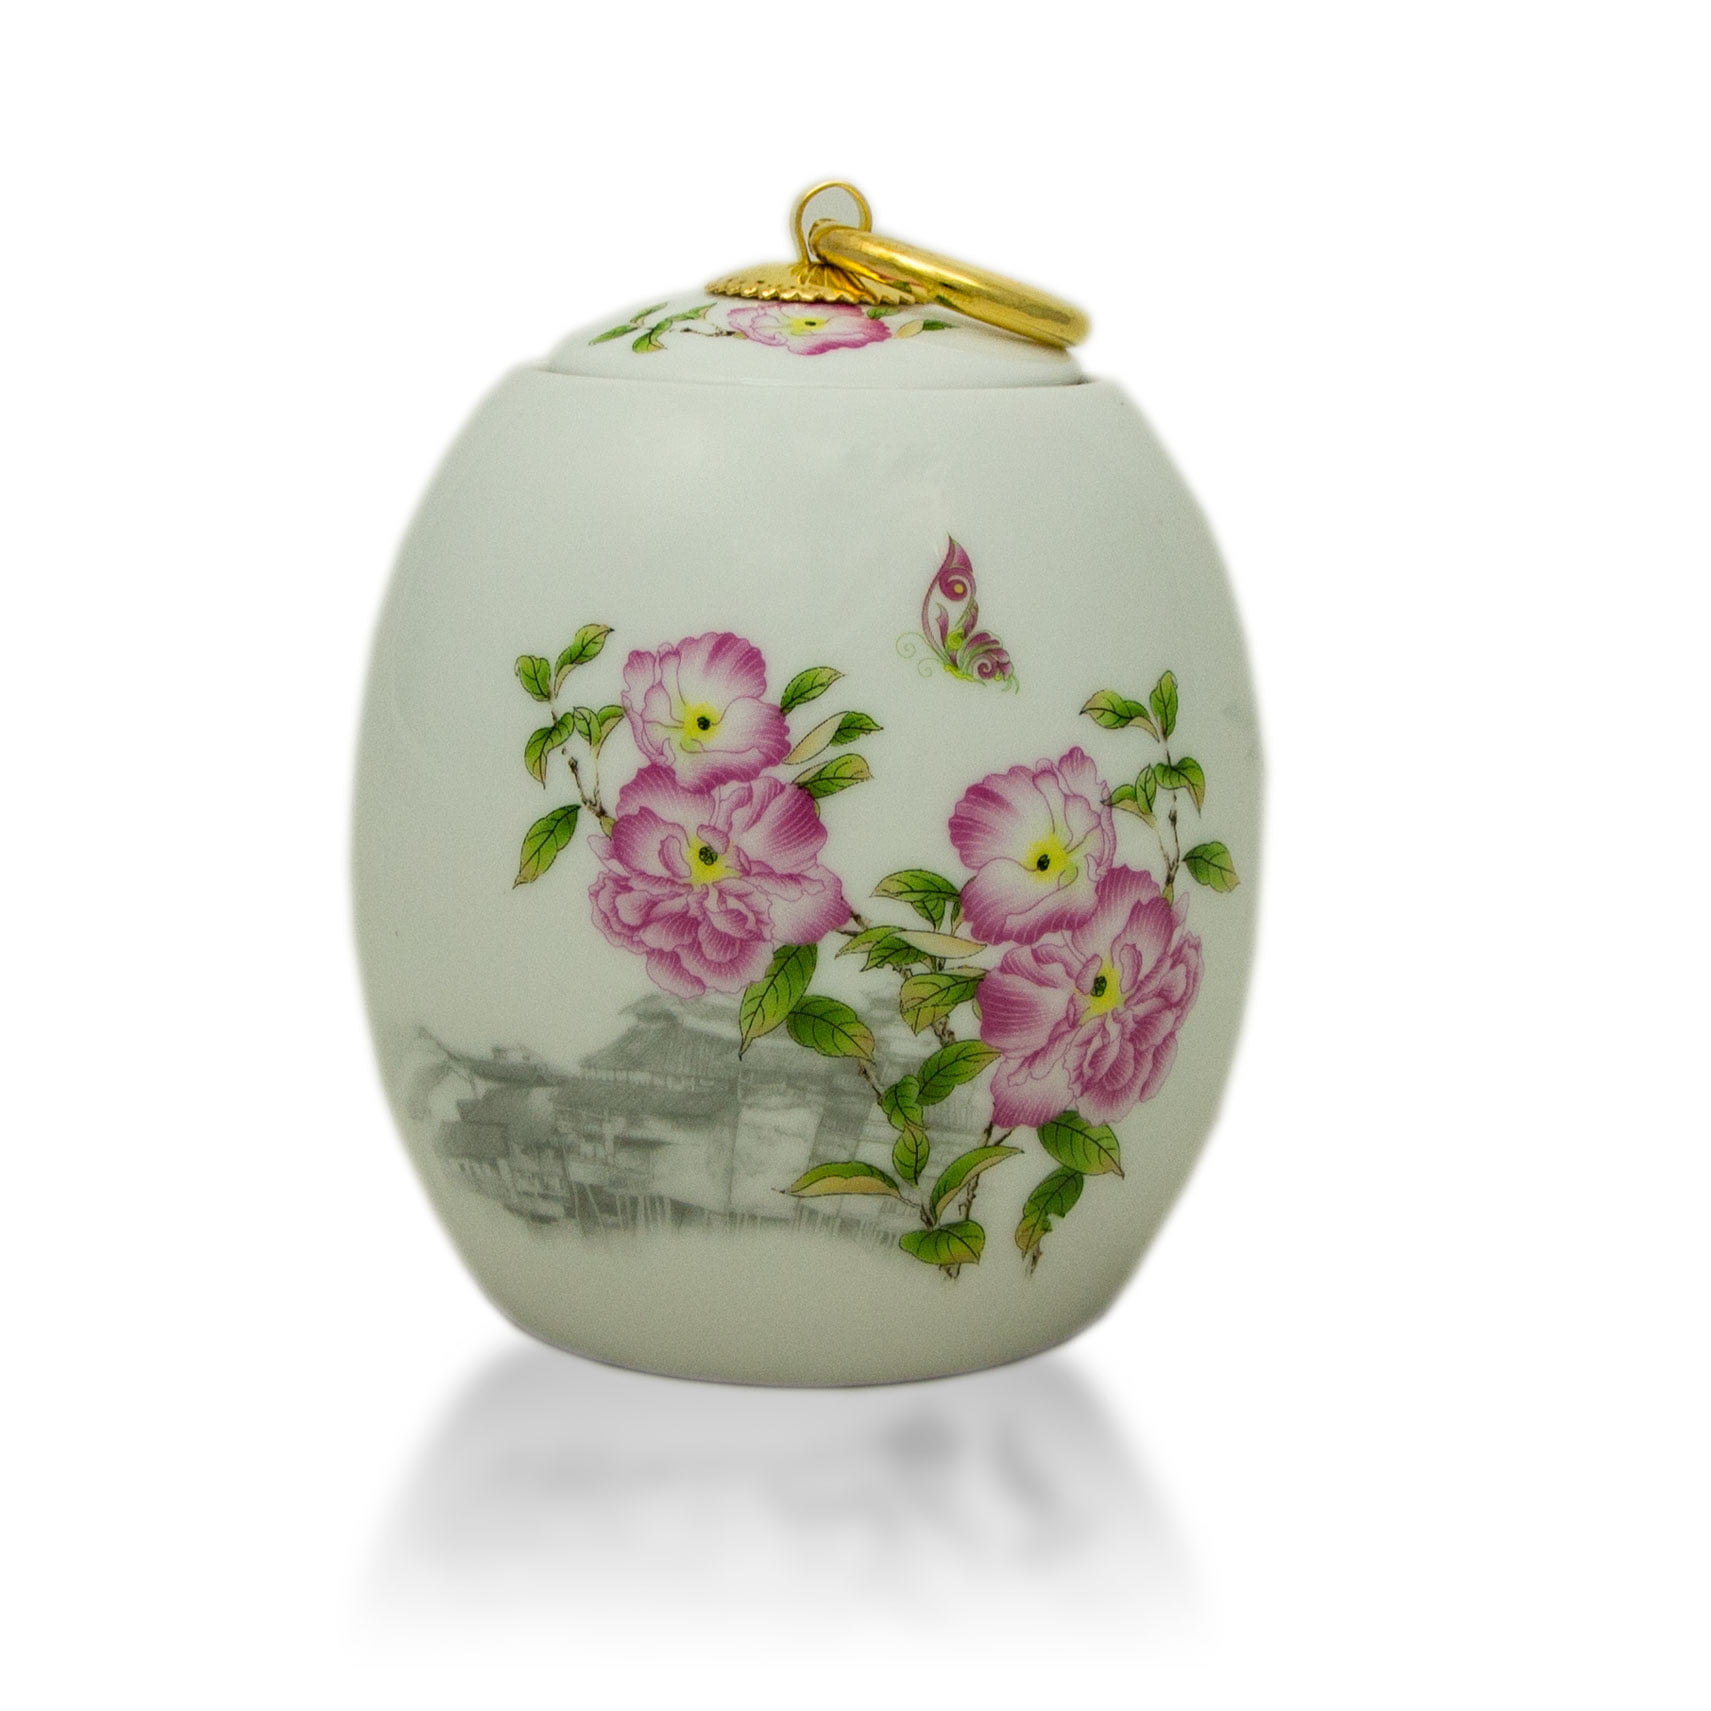 Ceramic Memorial Urn For Loved Ones Extra Small 18 Pounds White Pink Peonies Engraving Sold Separately Walmart Com Walmart Com